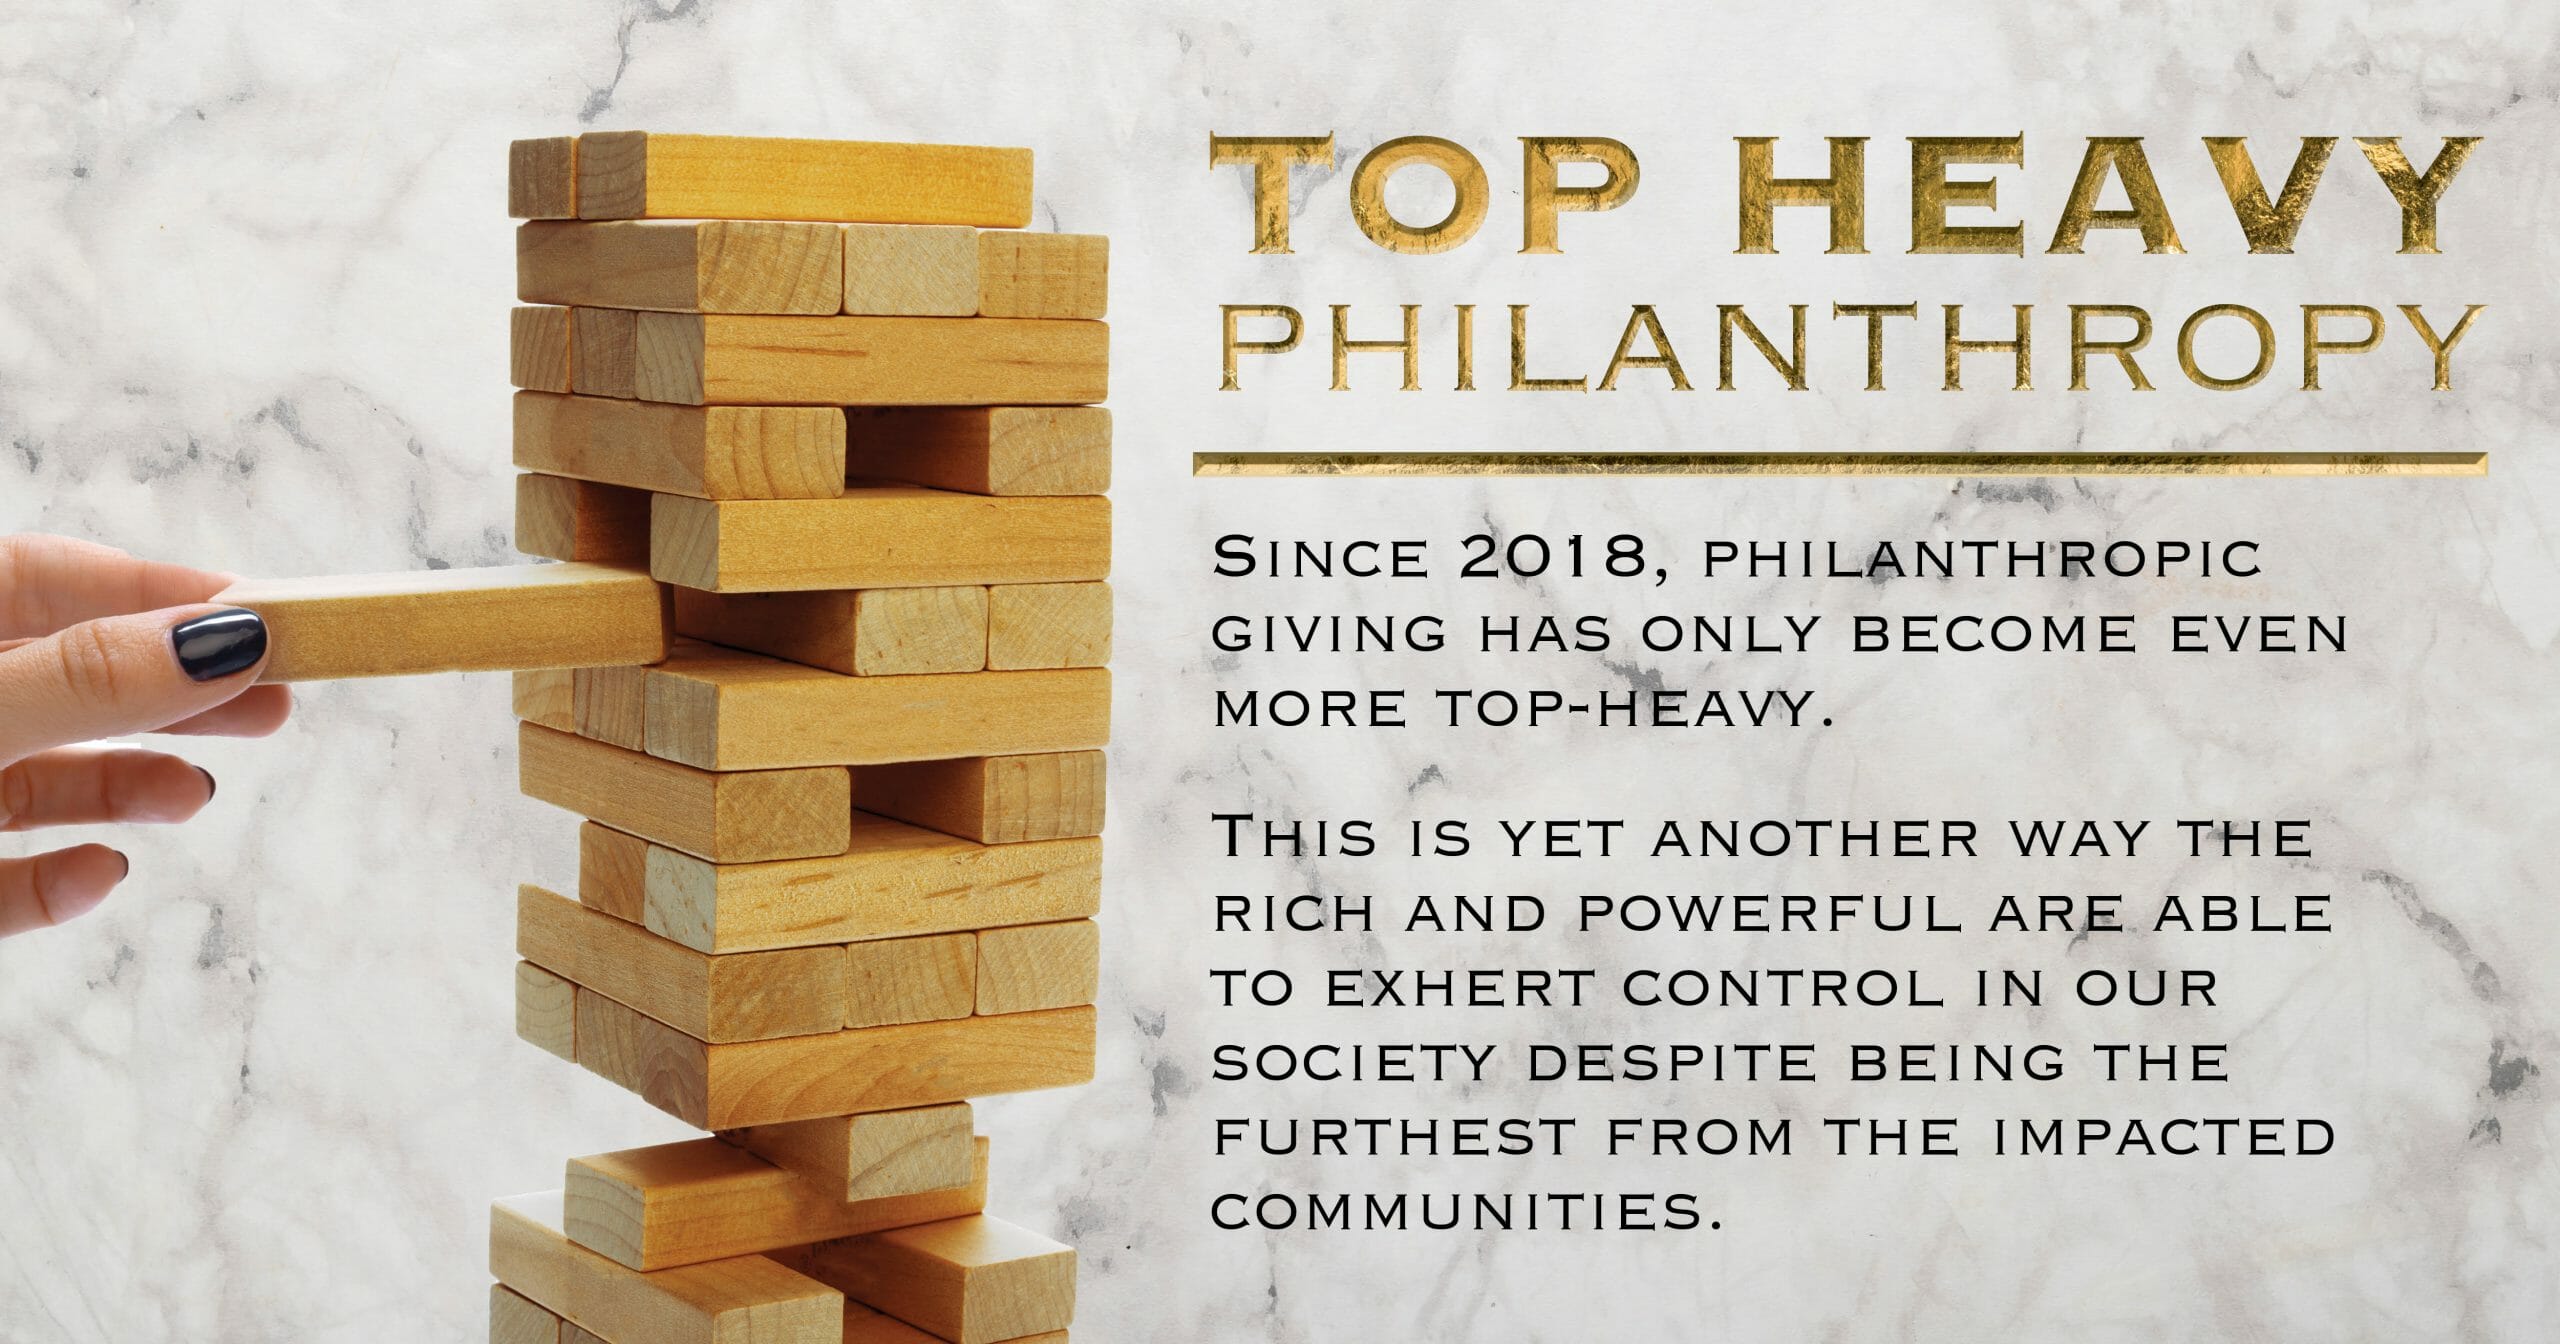 Top heavy philanthropy. Since 2018, philanthropic giving has only become even more top-heavy. This is yet another way the rich and powerful are able to exhert control in our society despite being the furthest from the impacted communities.